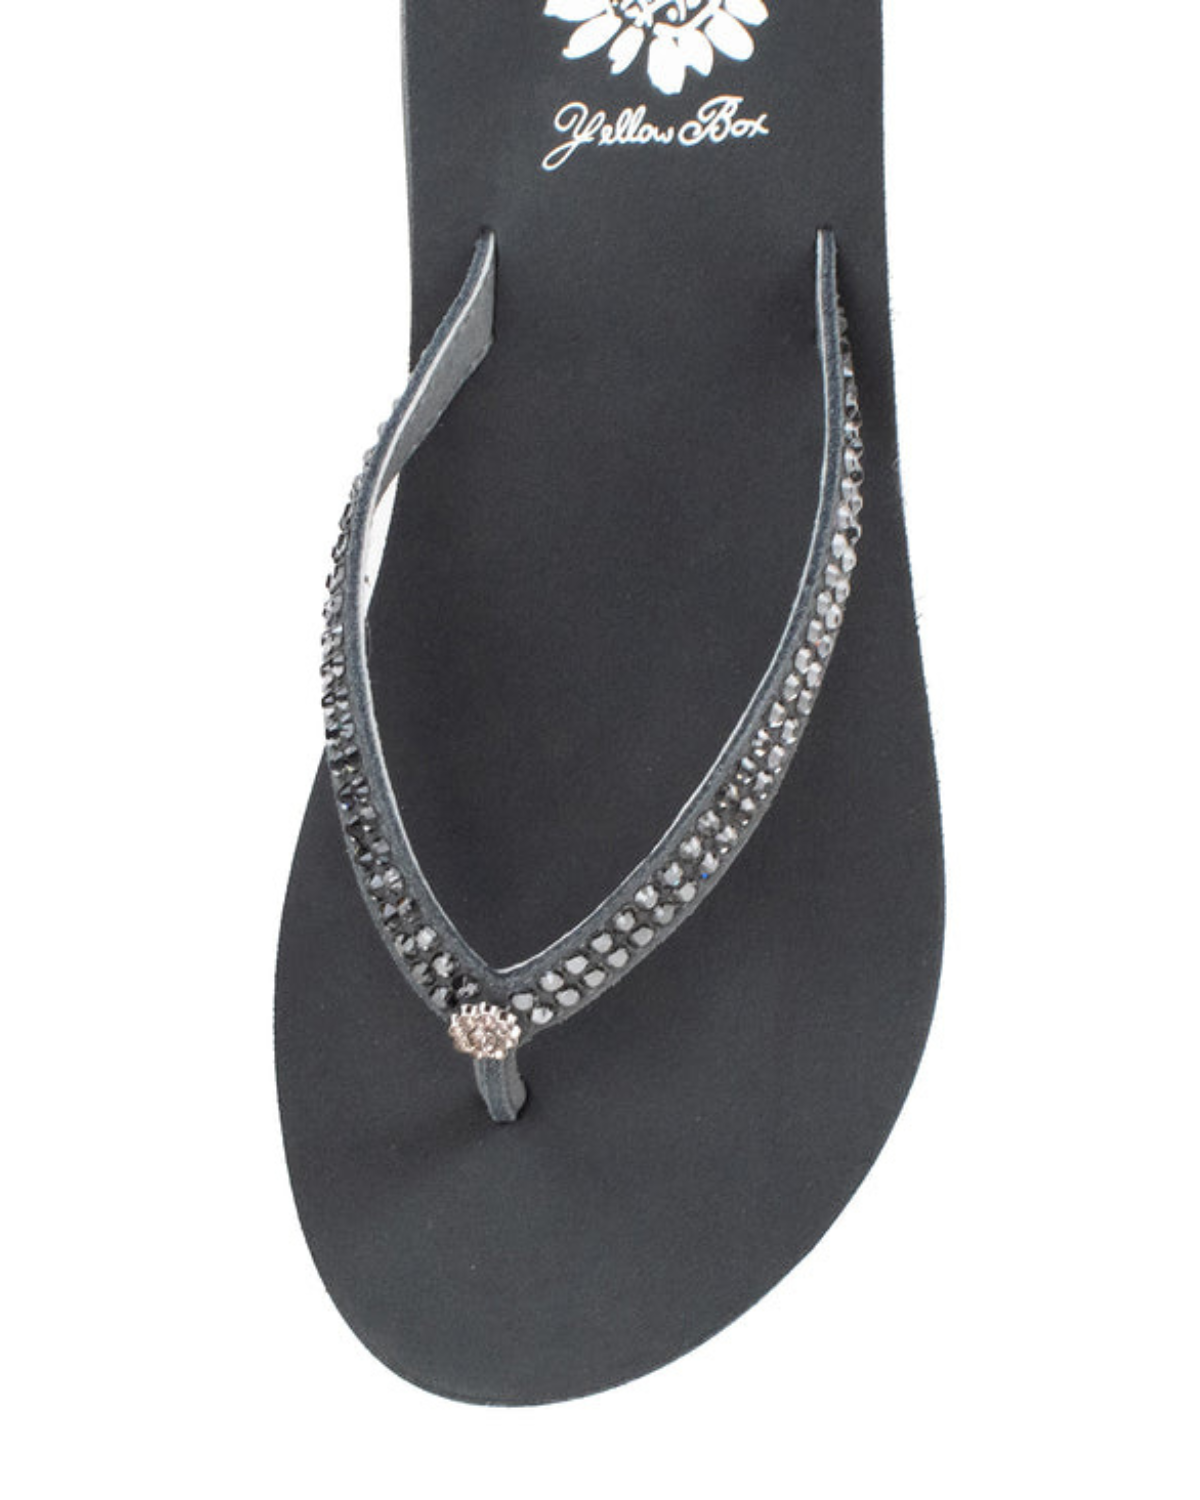 Top view of a grey wedge sandal with rhinestones on the strap on a white backdrop. The sandal has 1.75" heel height and 0.75" platform height.